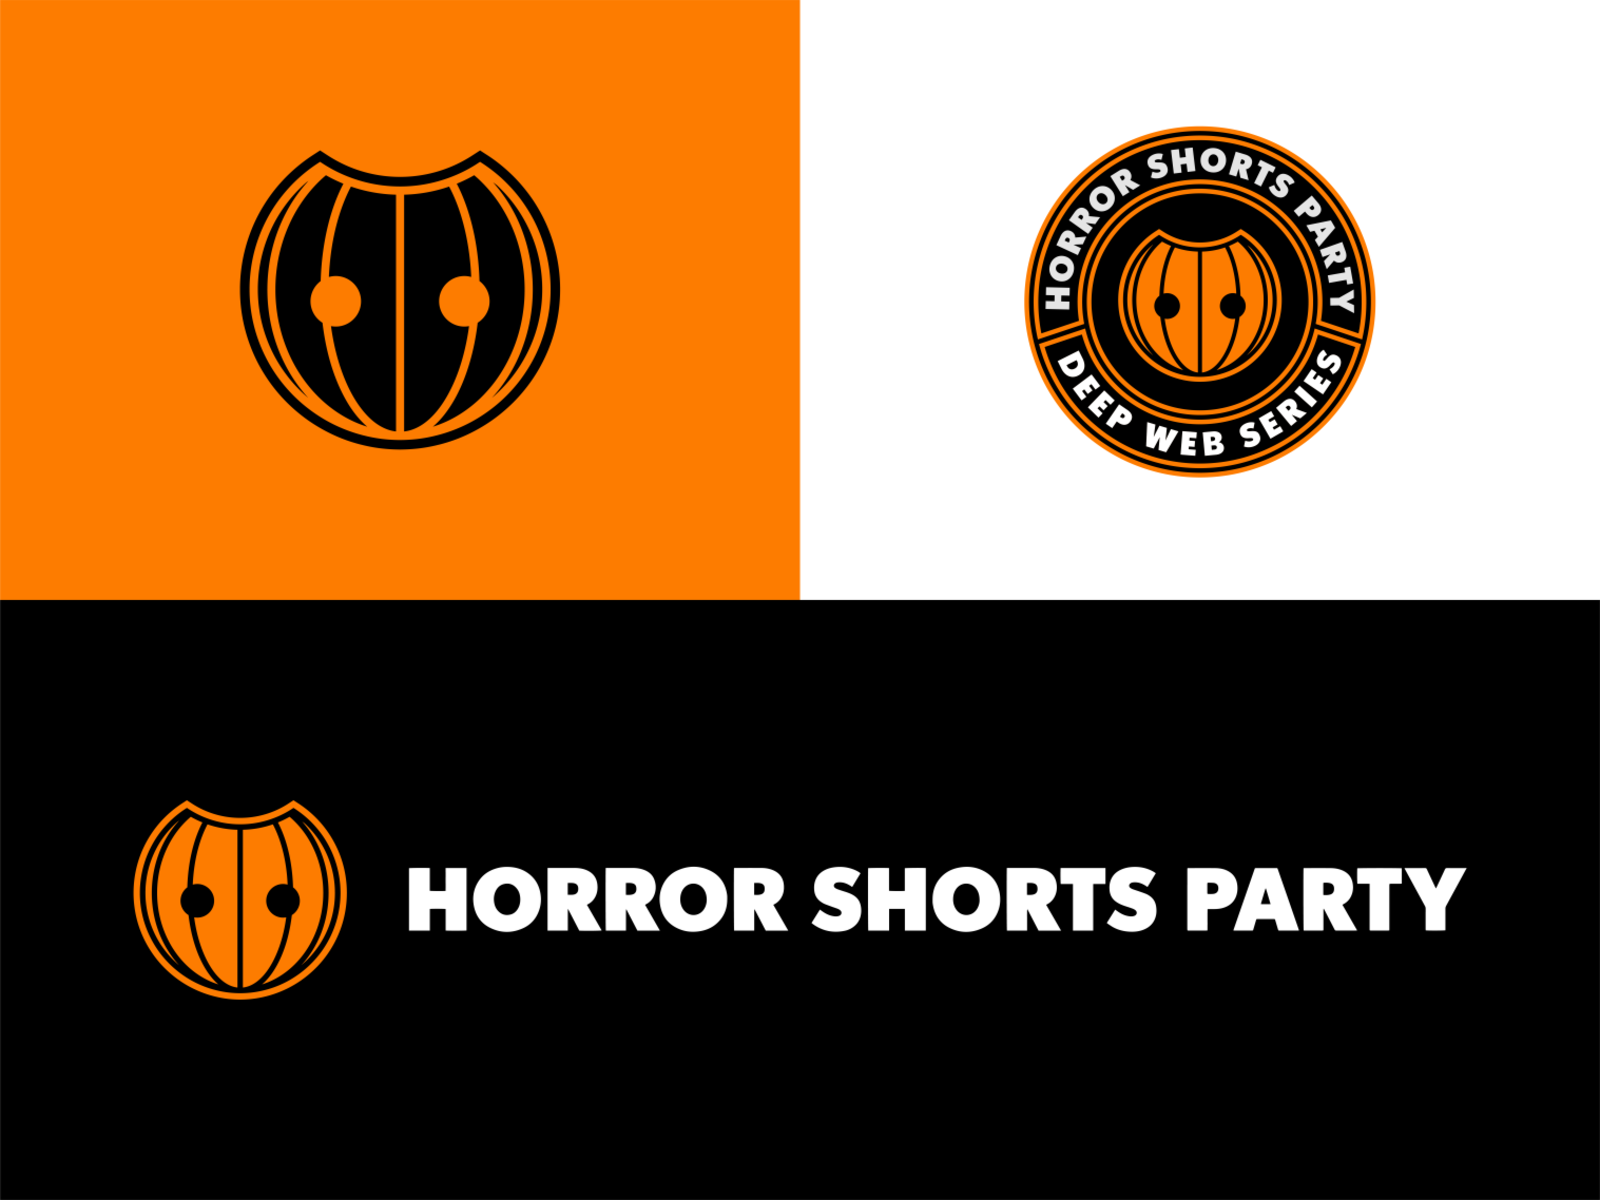 Horror Shorts Party by Thomas Nguyen on Dribbble